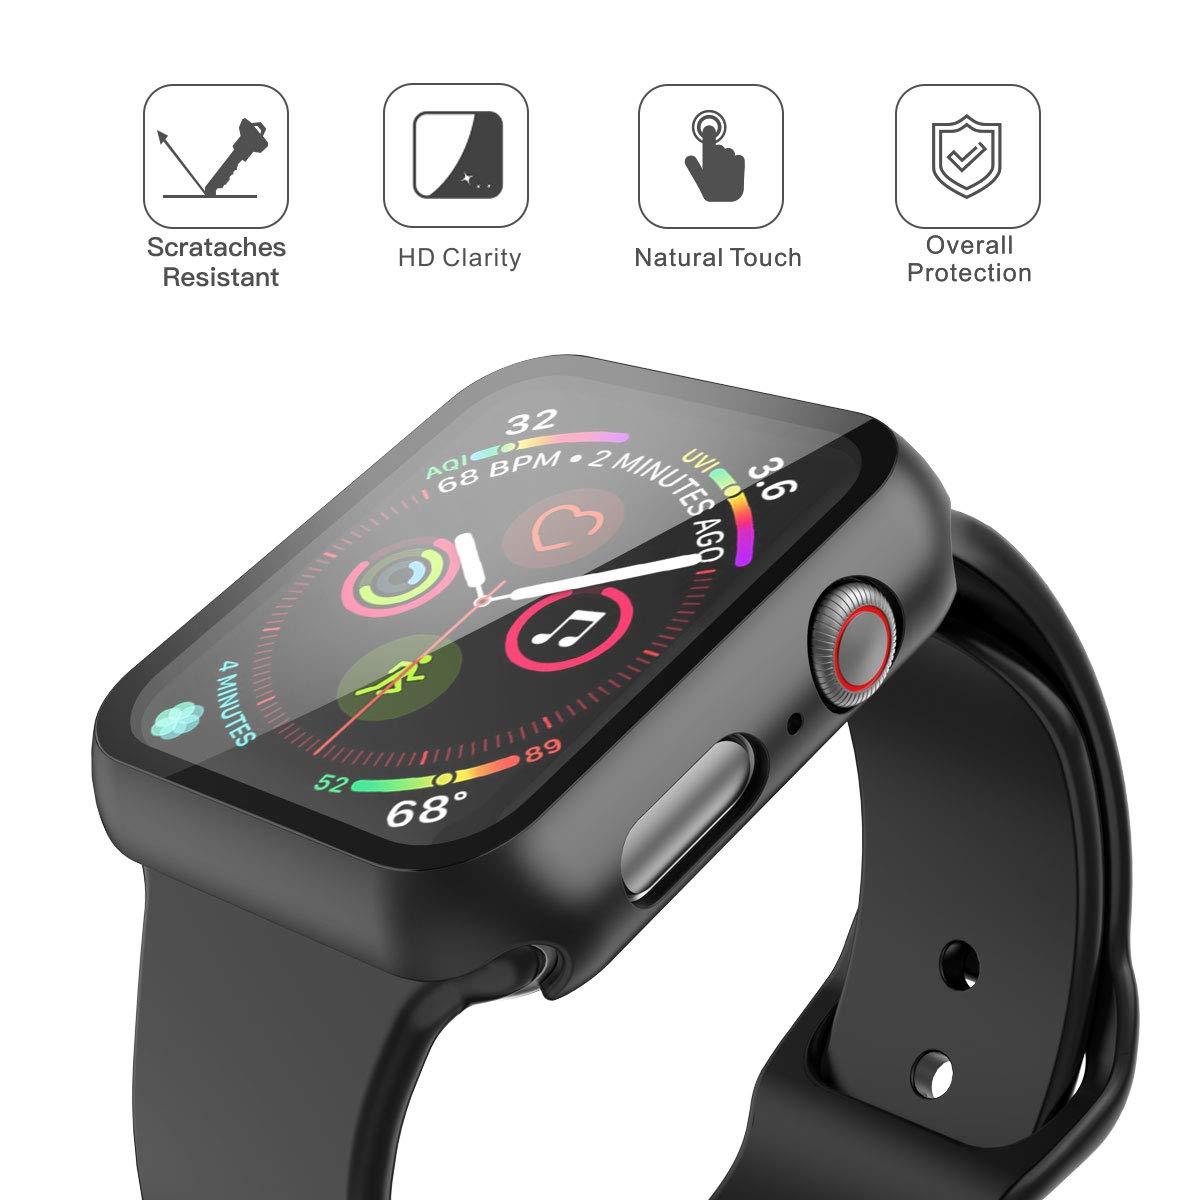 Hard Case for Apple Watch - watchband.direct